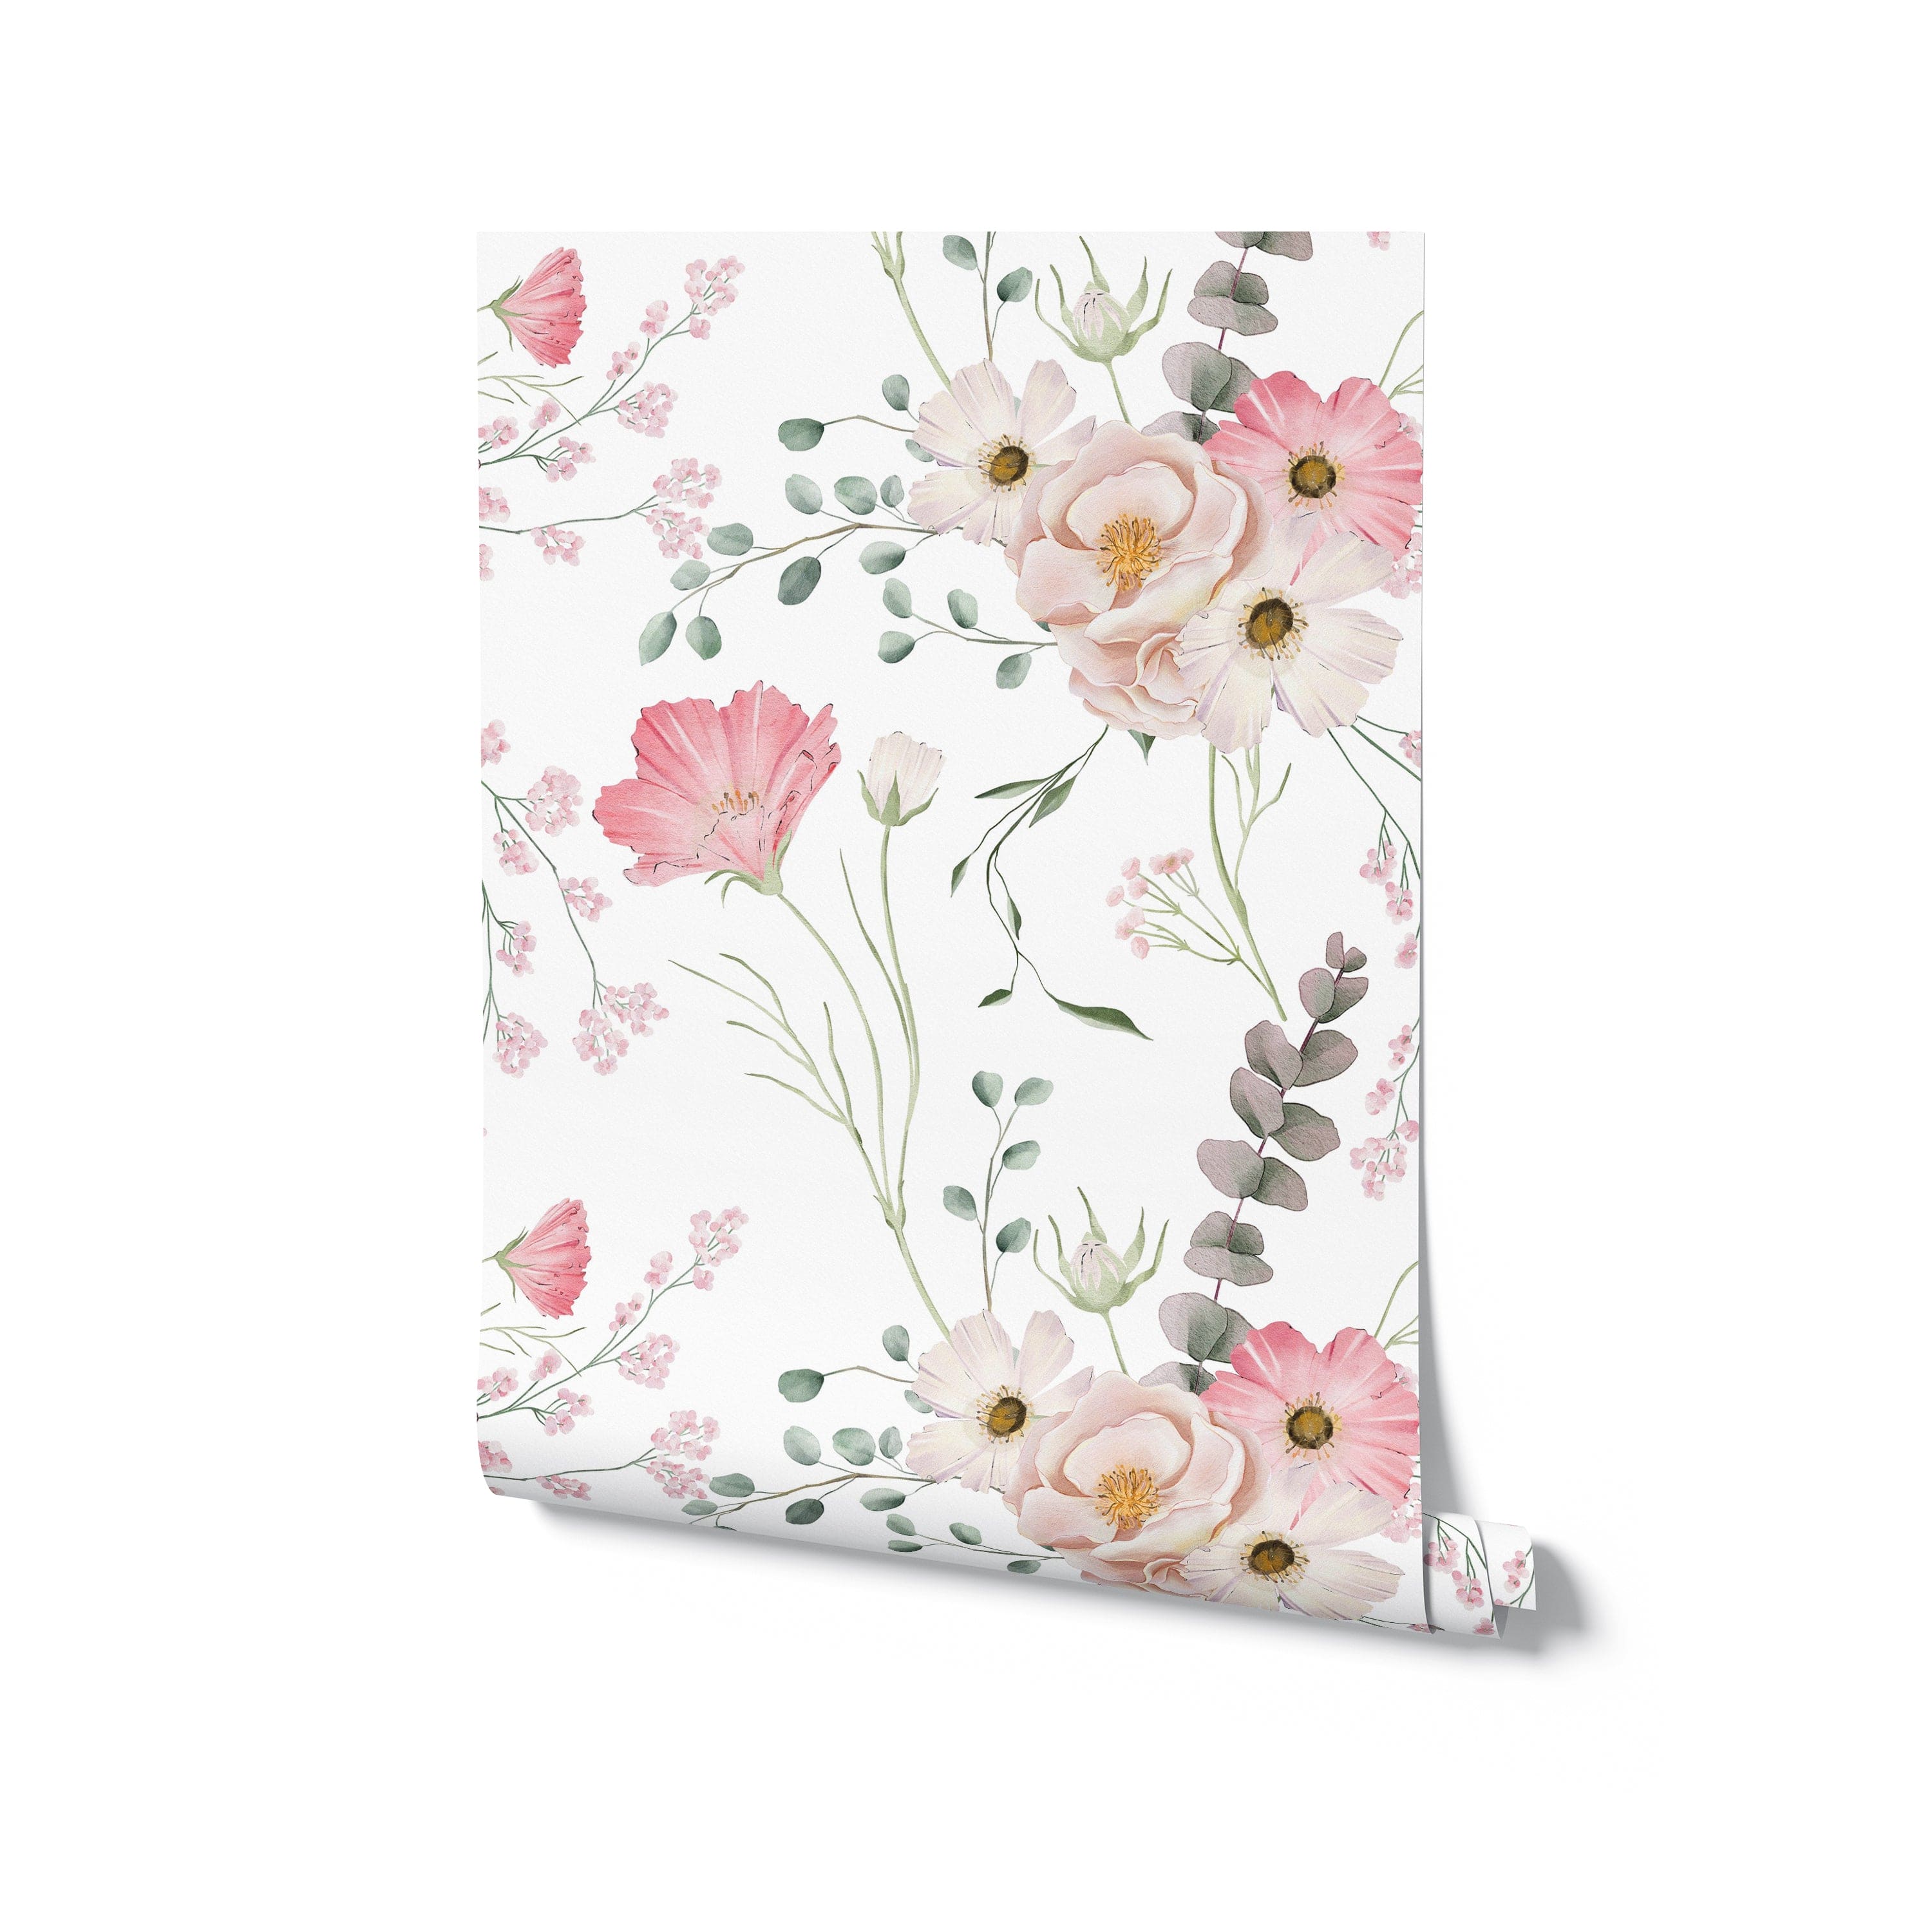 Mockup of the Flourish Wallpaper roll displaying the full pattern of delicate pink and white flowers, green leaves, and sprigs of baby’s breath on a white background, perfect for creating a romantic and serene atmosphere.